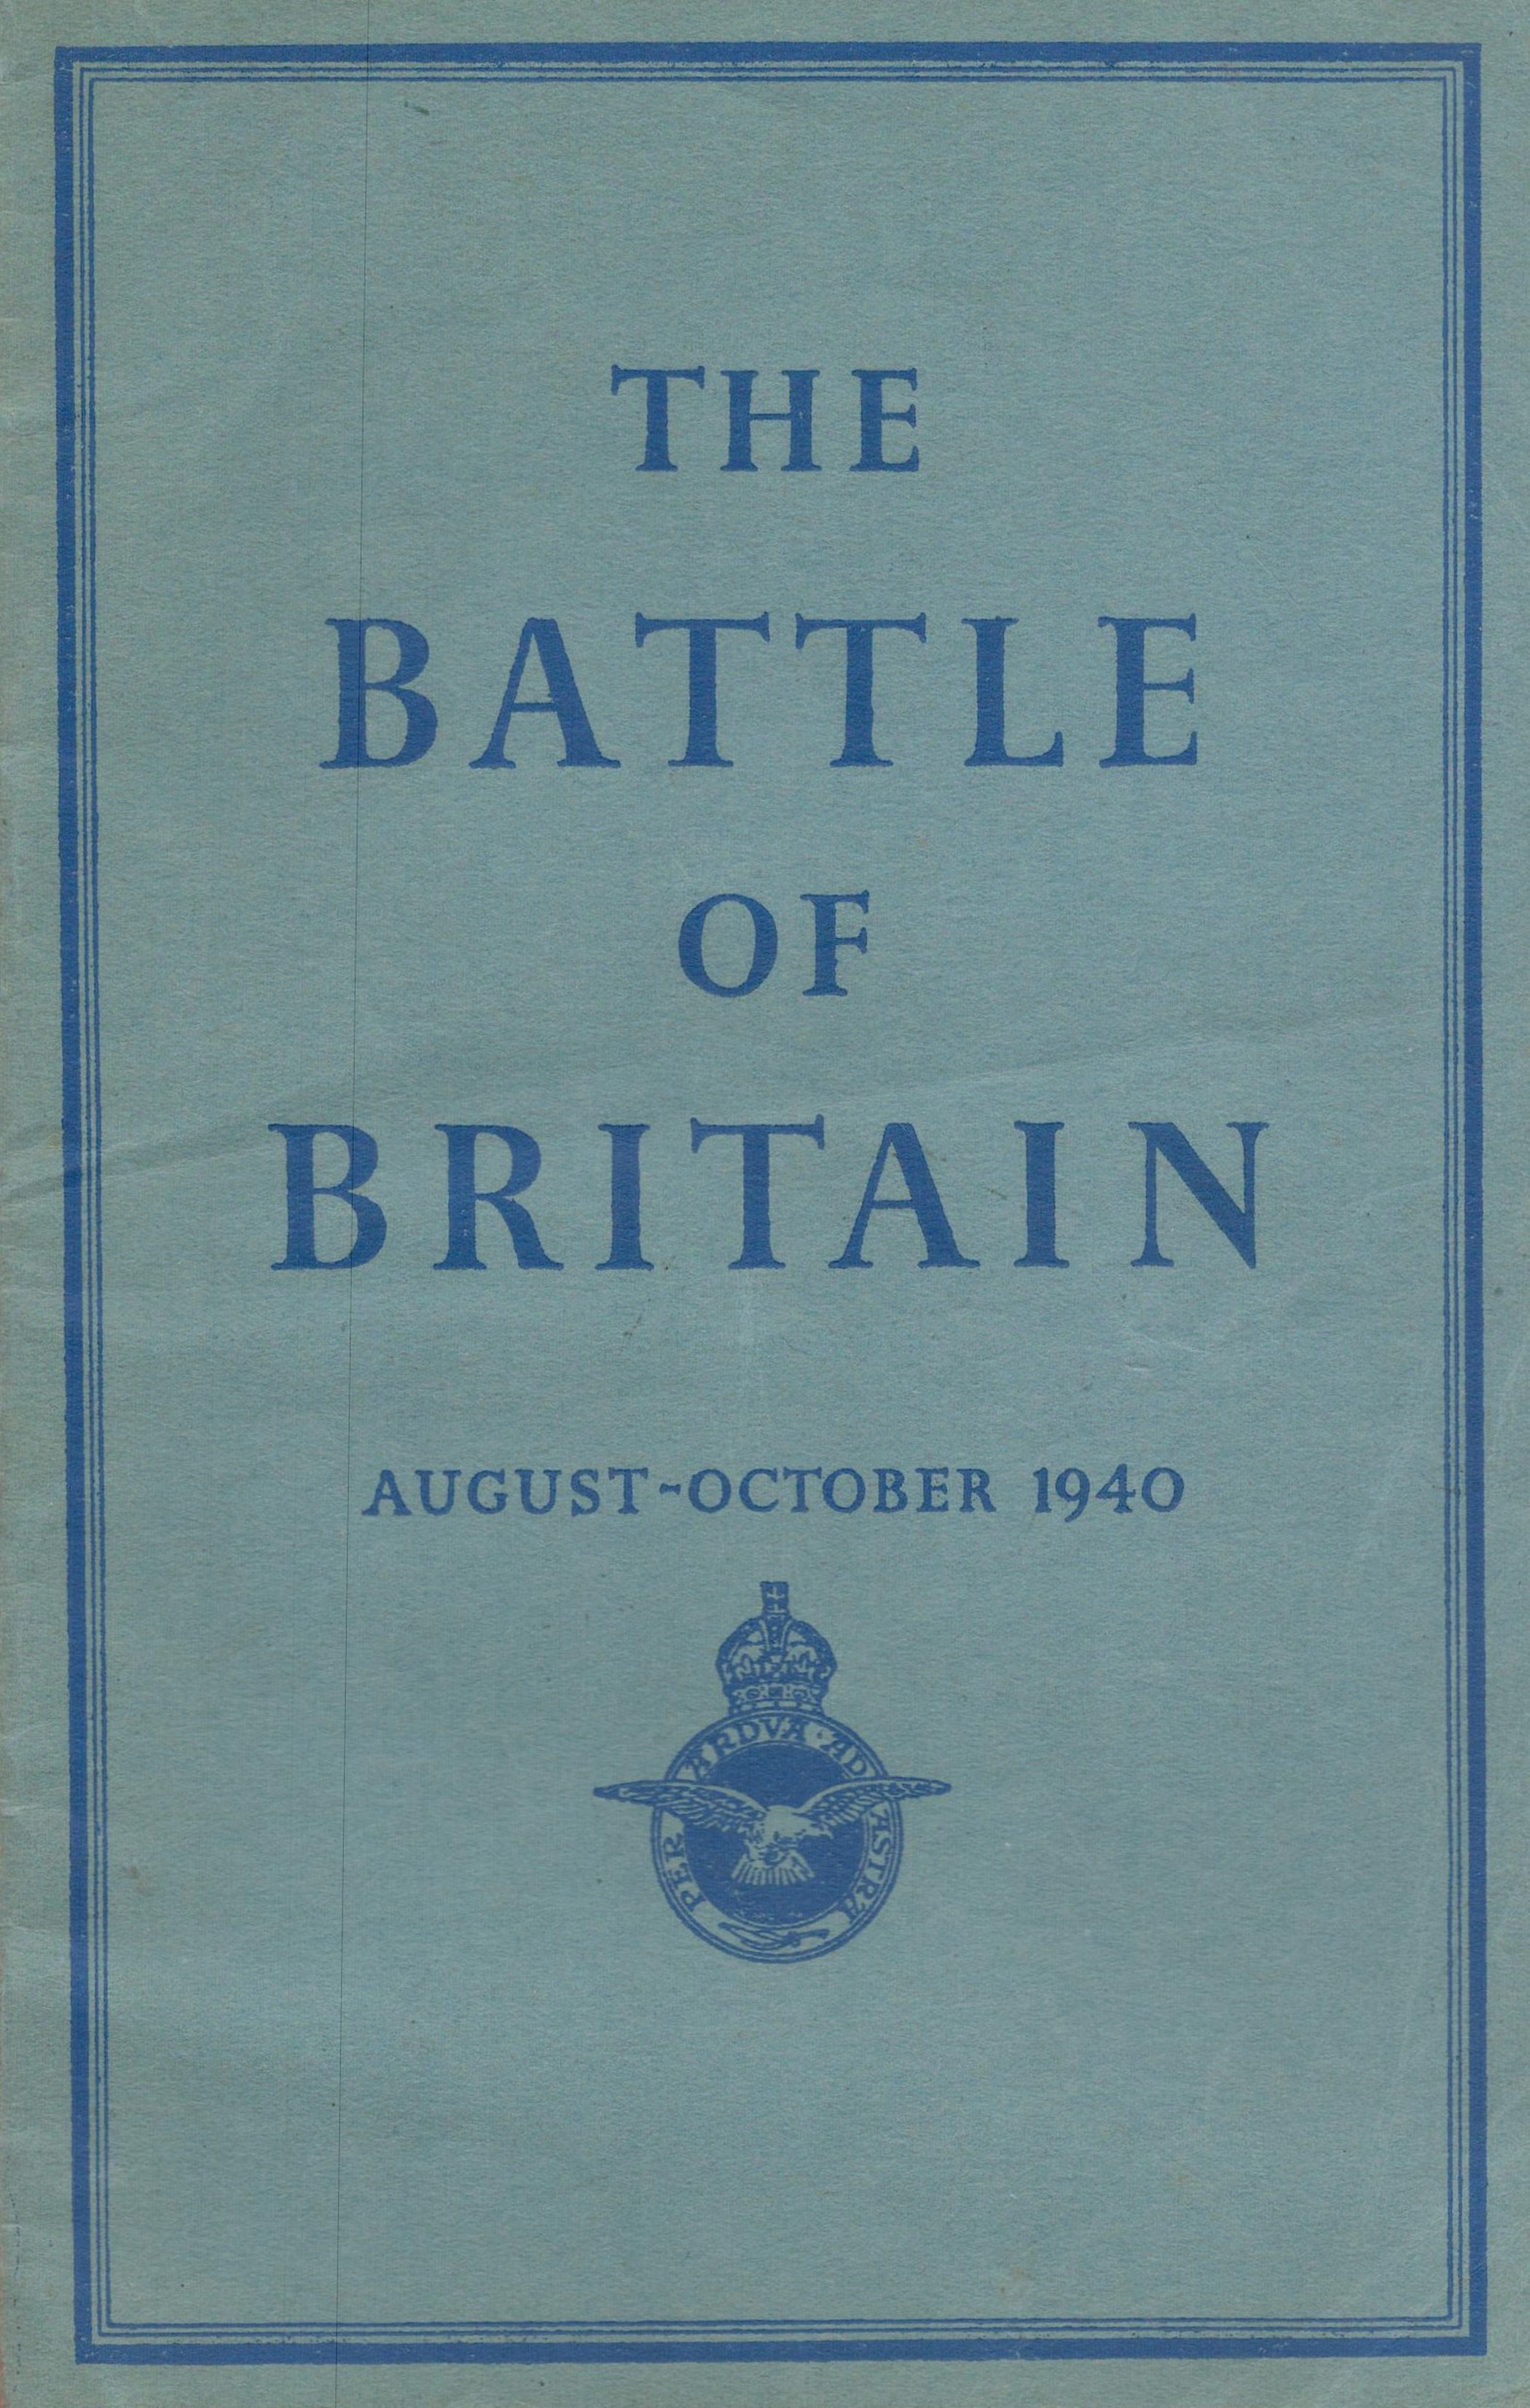 WW2 1940 Battle of Britain official Ministry of Information booklet. Good condition. All